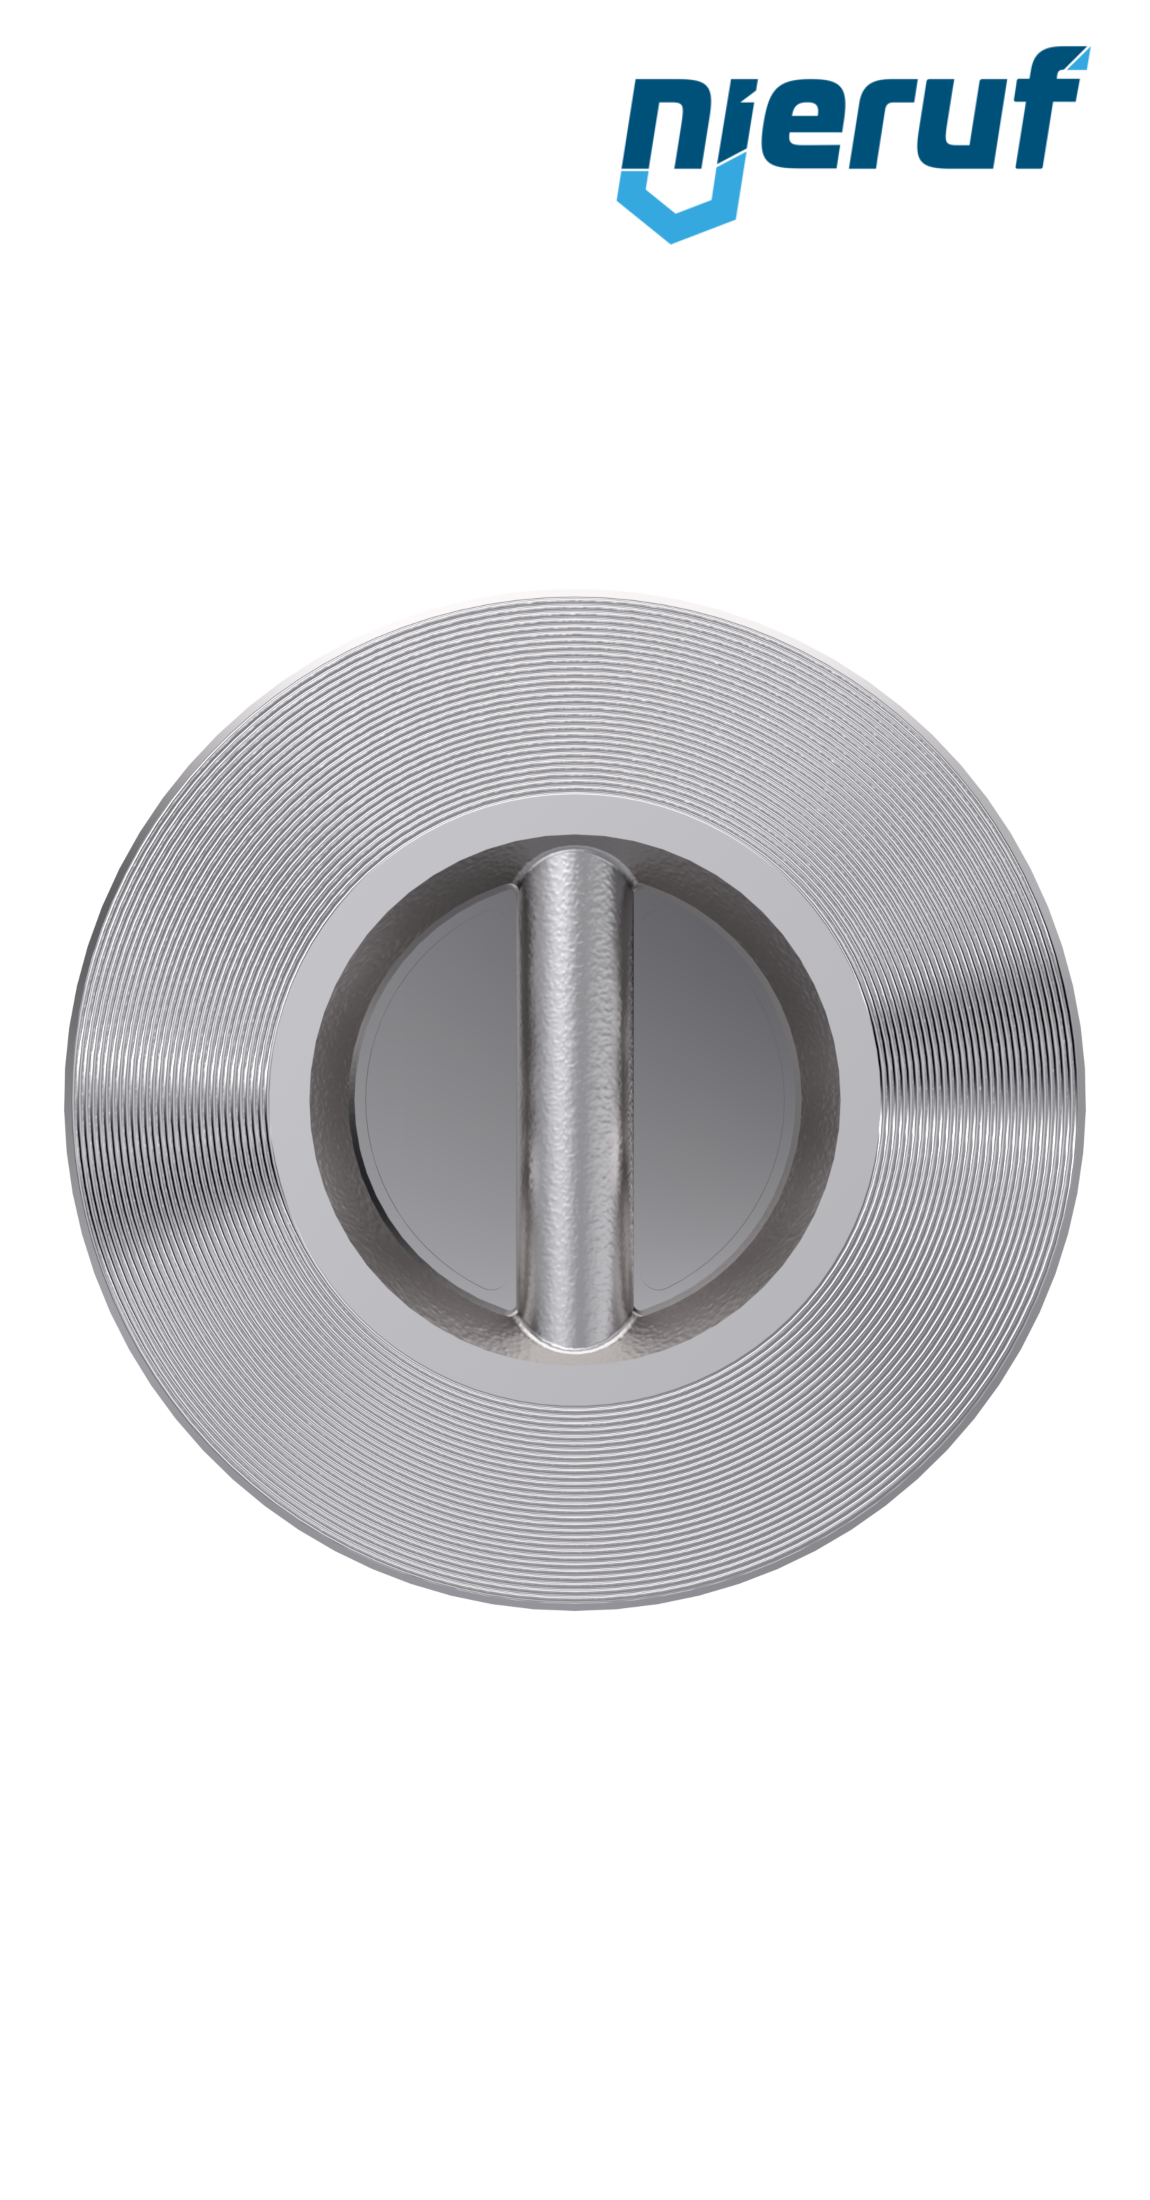 dual plate check valve DN65 DR03 stainless steel 1.4408 metal